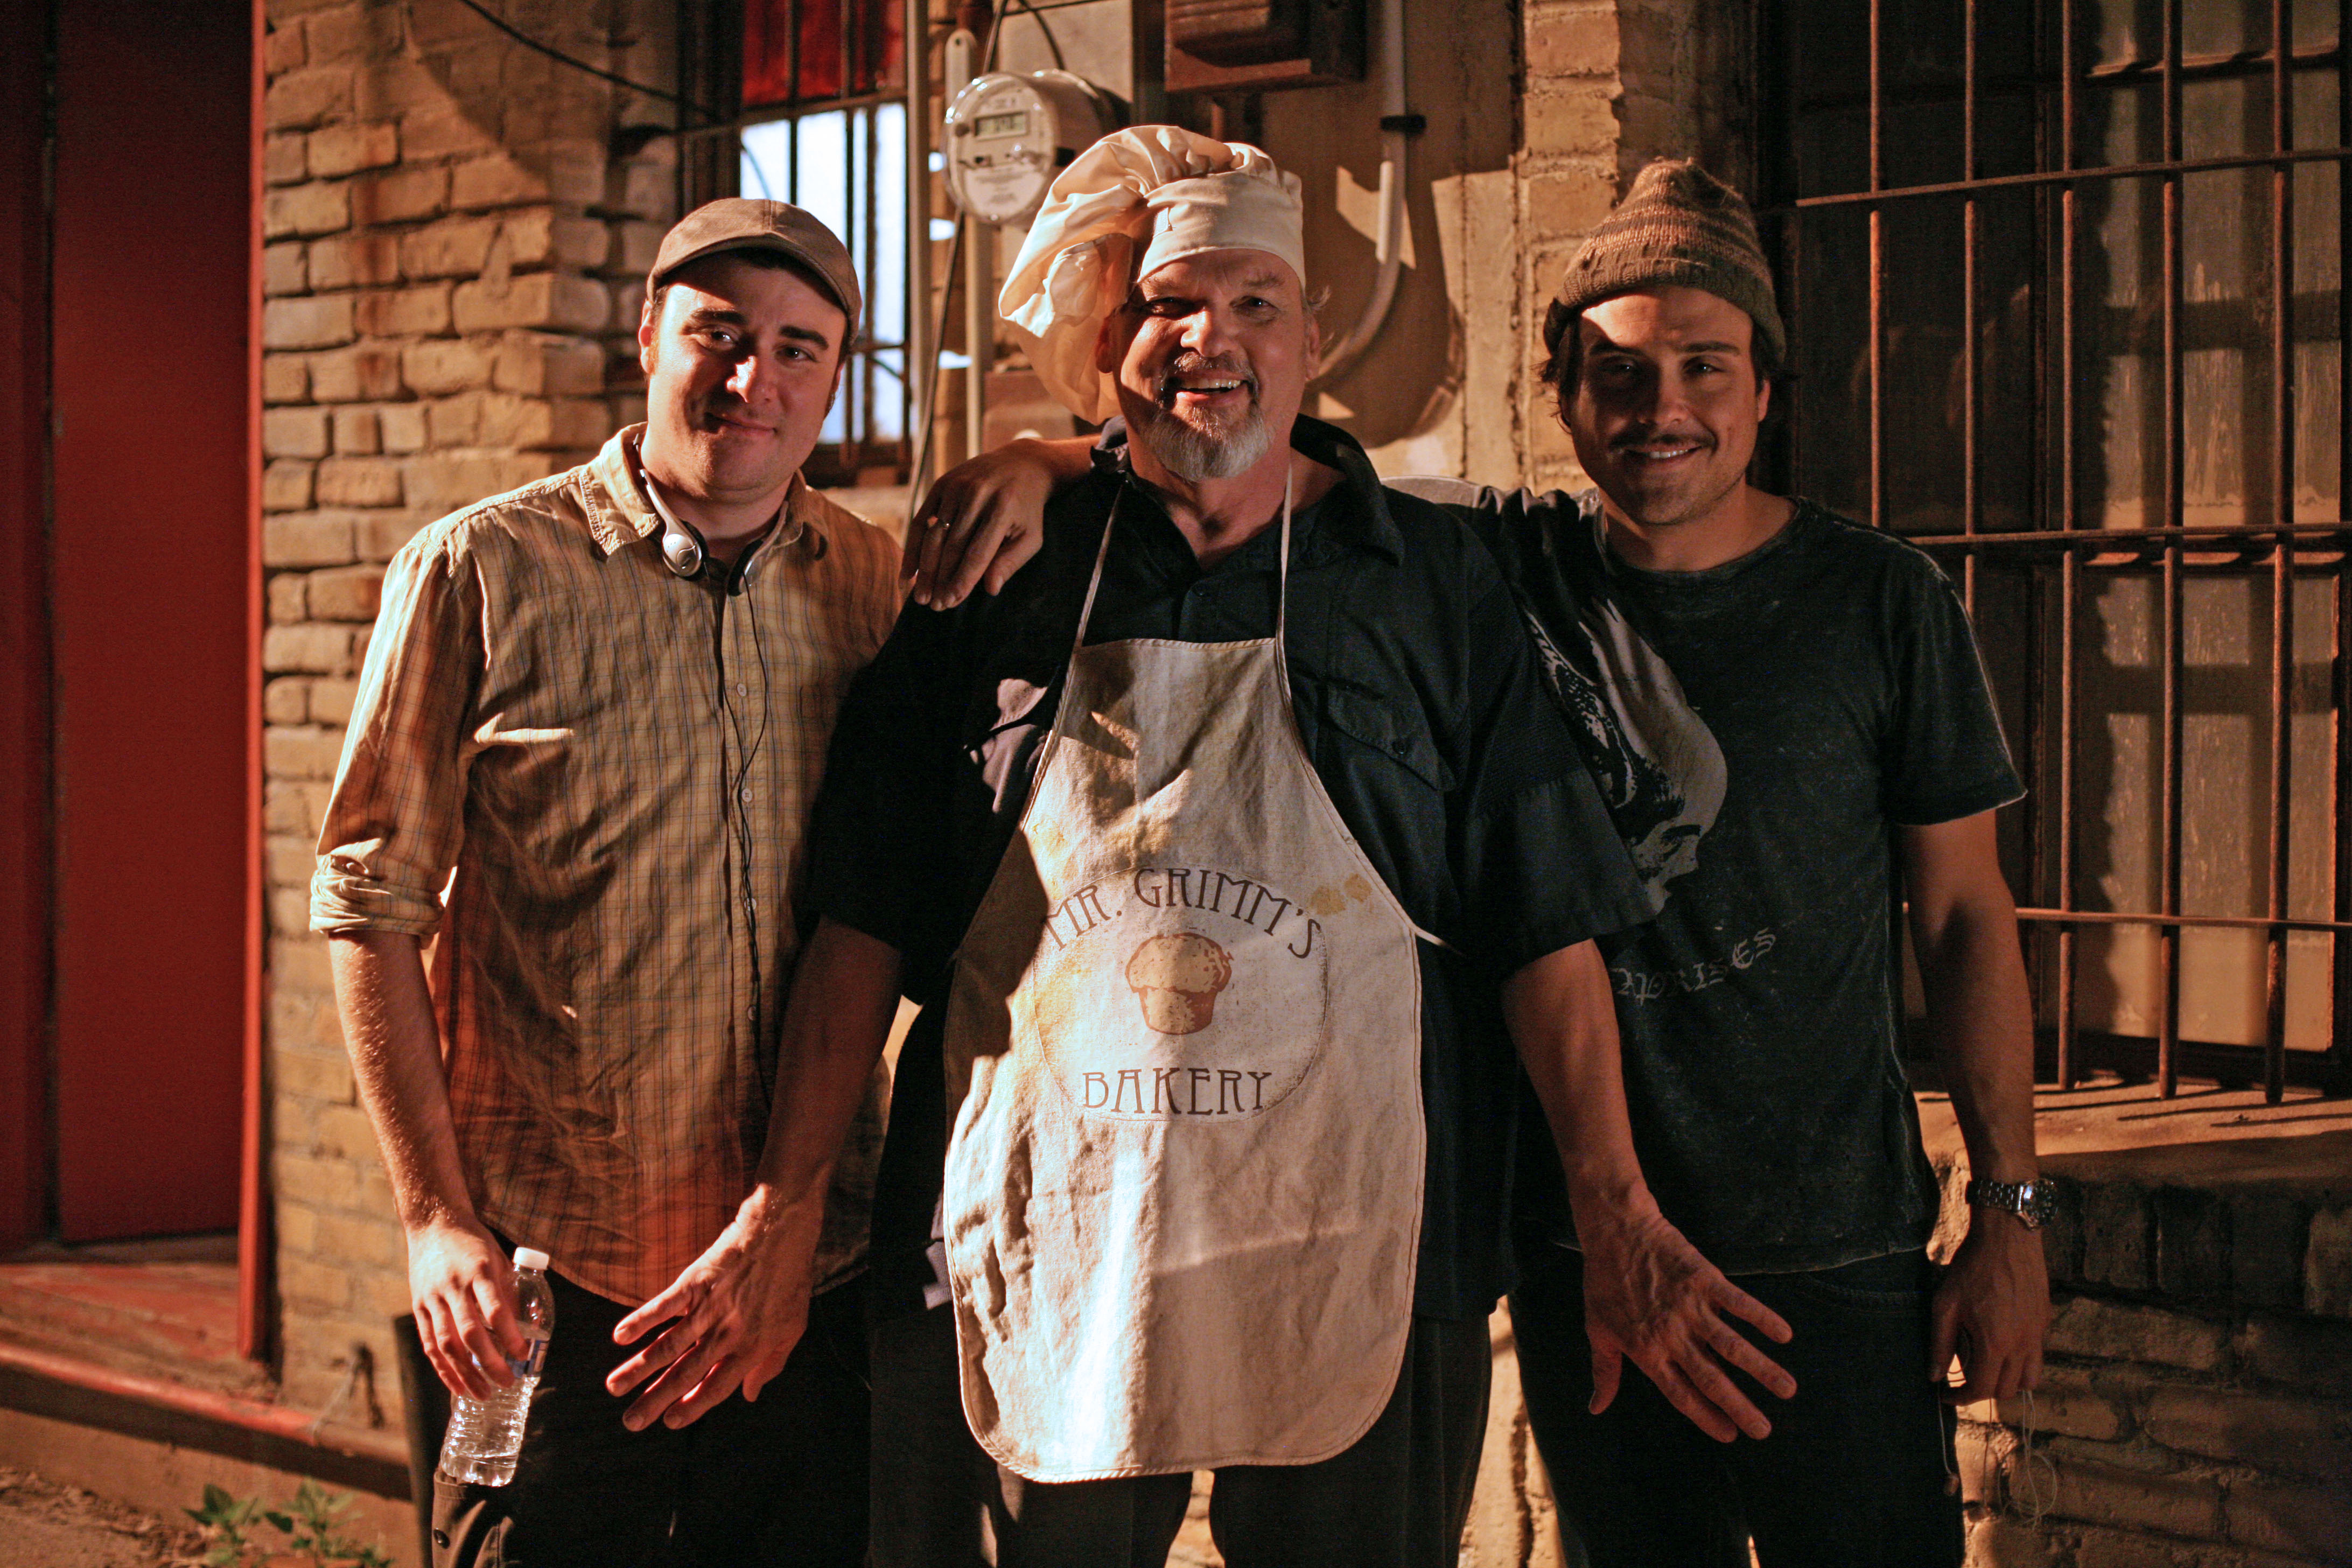 L-R: Co-director Duane Graves, Bill Johnson (Texas Chainsaw Massacre 2), and co-director Justin Meeks on the set of BUTCHER BOYS, November, 2010